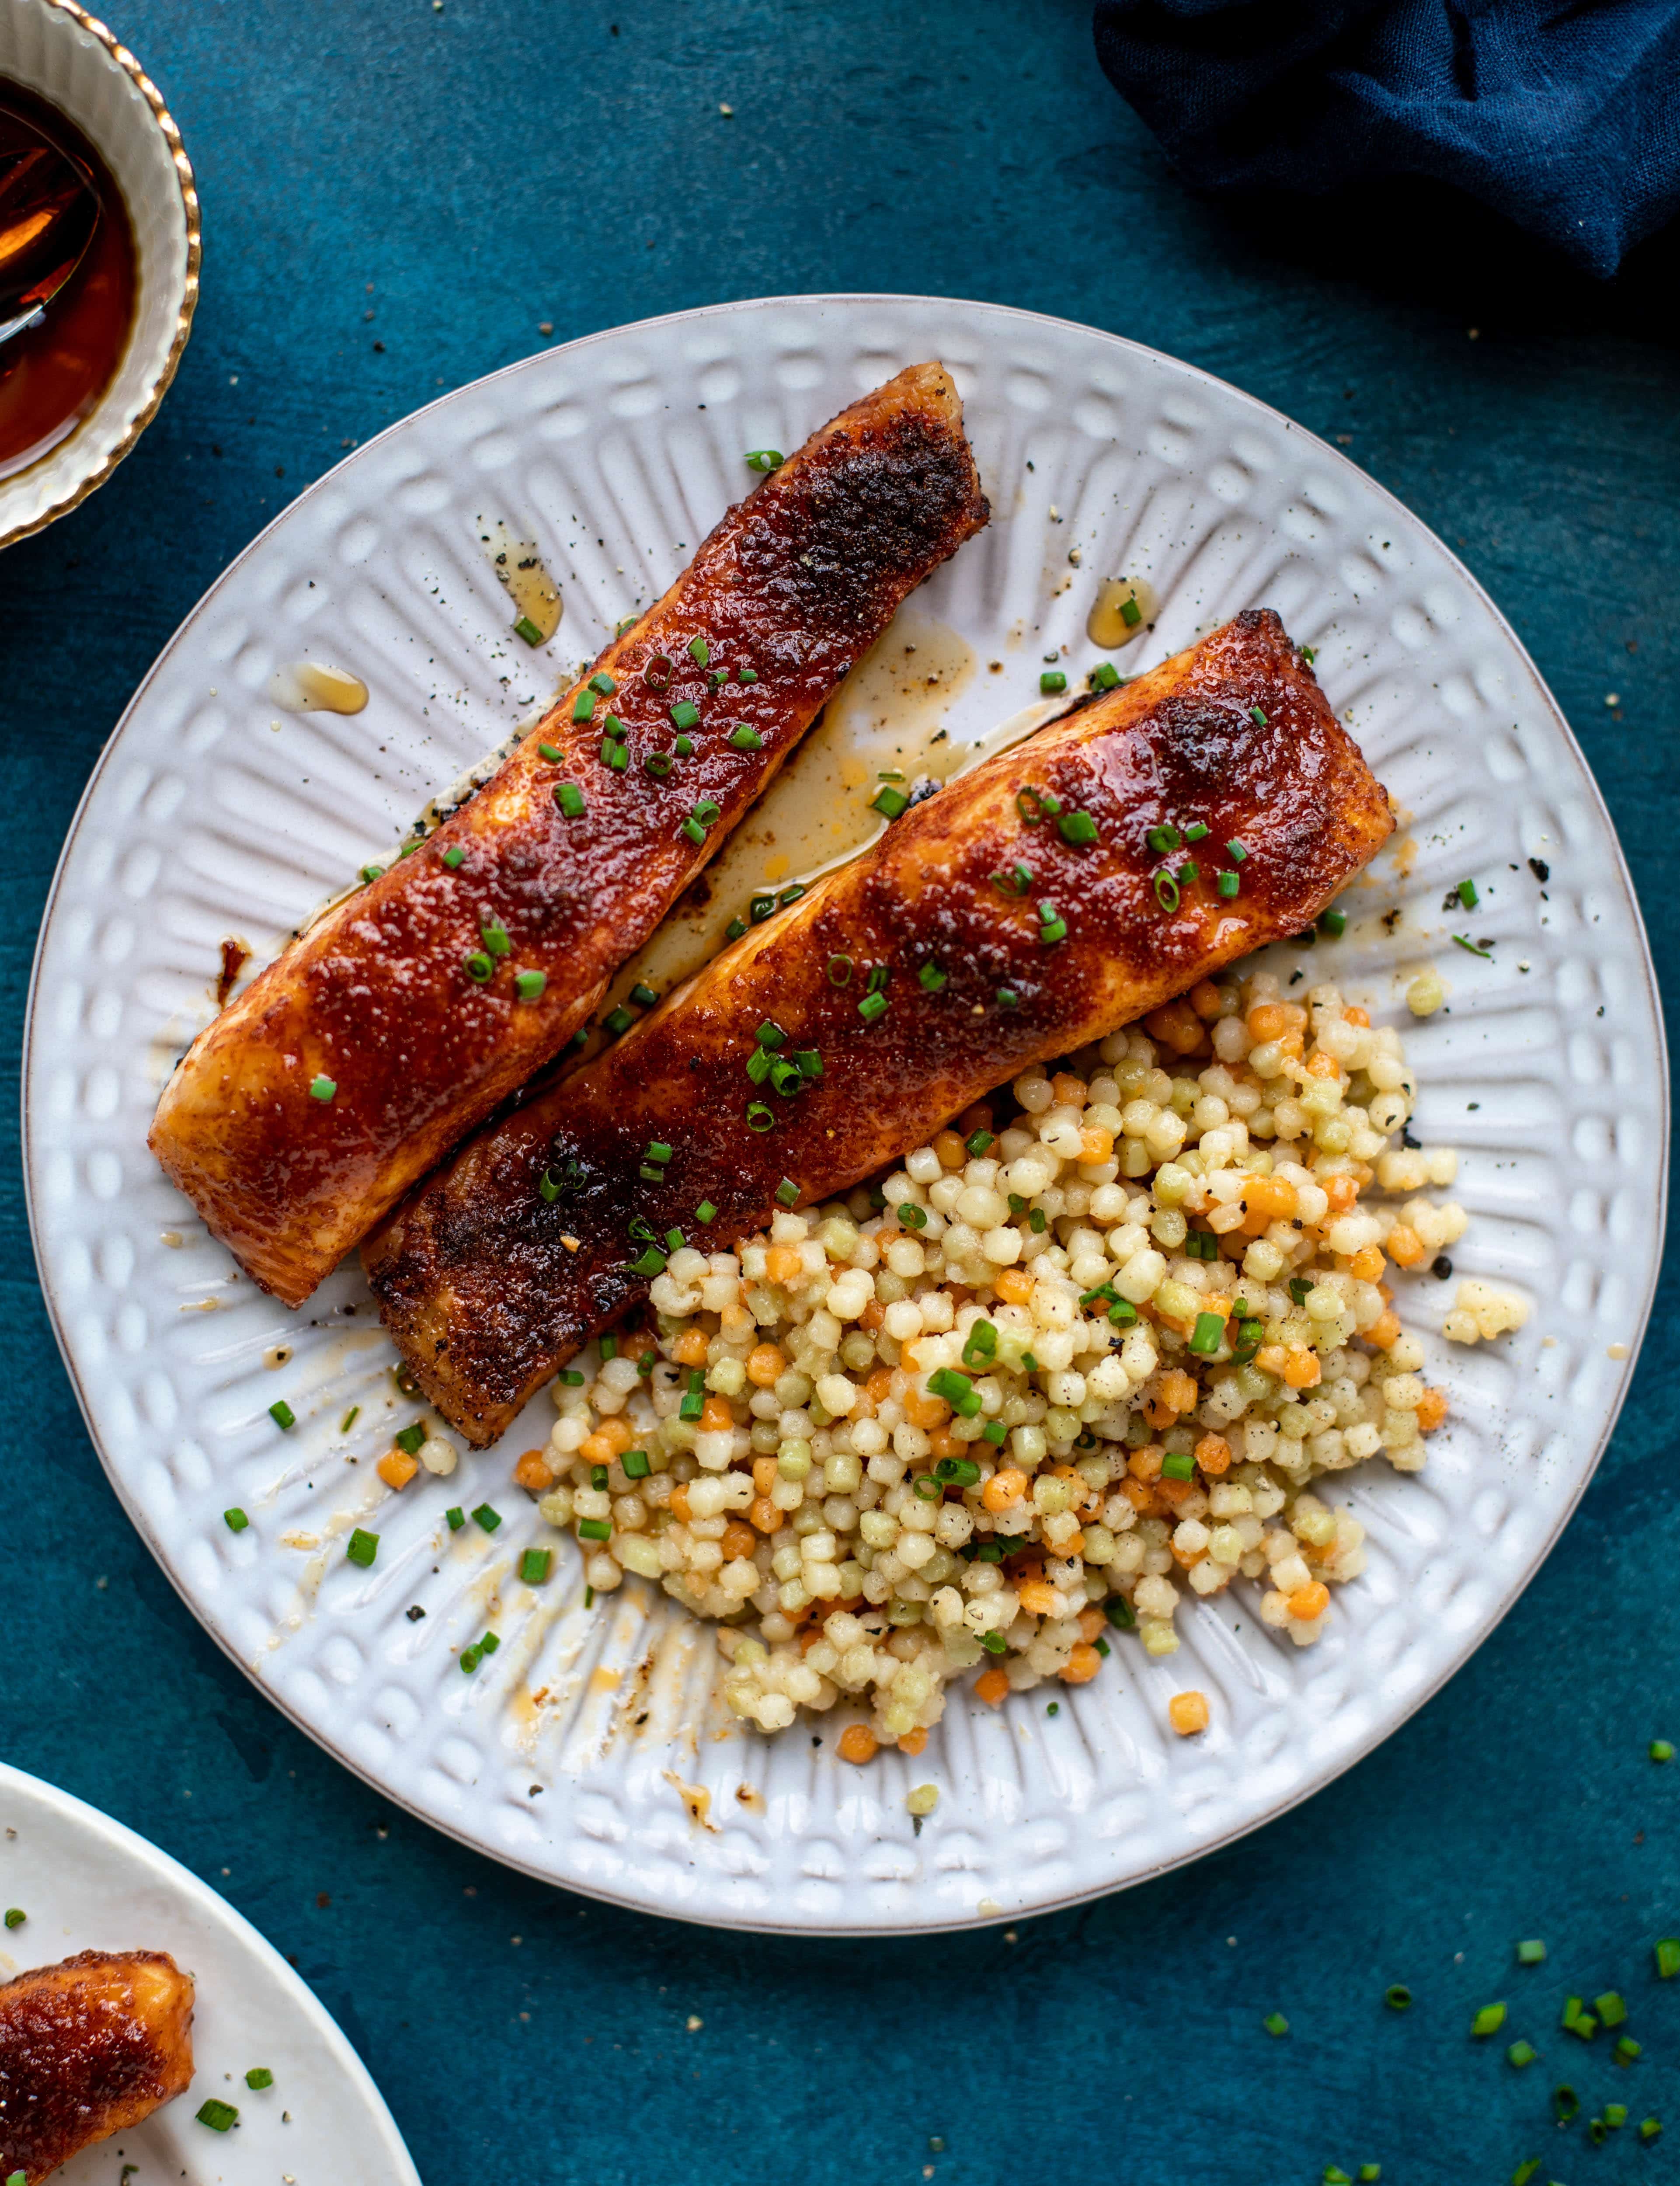 This maple bbq salmon is a quick and delicious weeknight meal. Serve with brown butter couscous and your favorite veg to round it out!